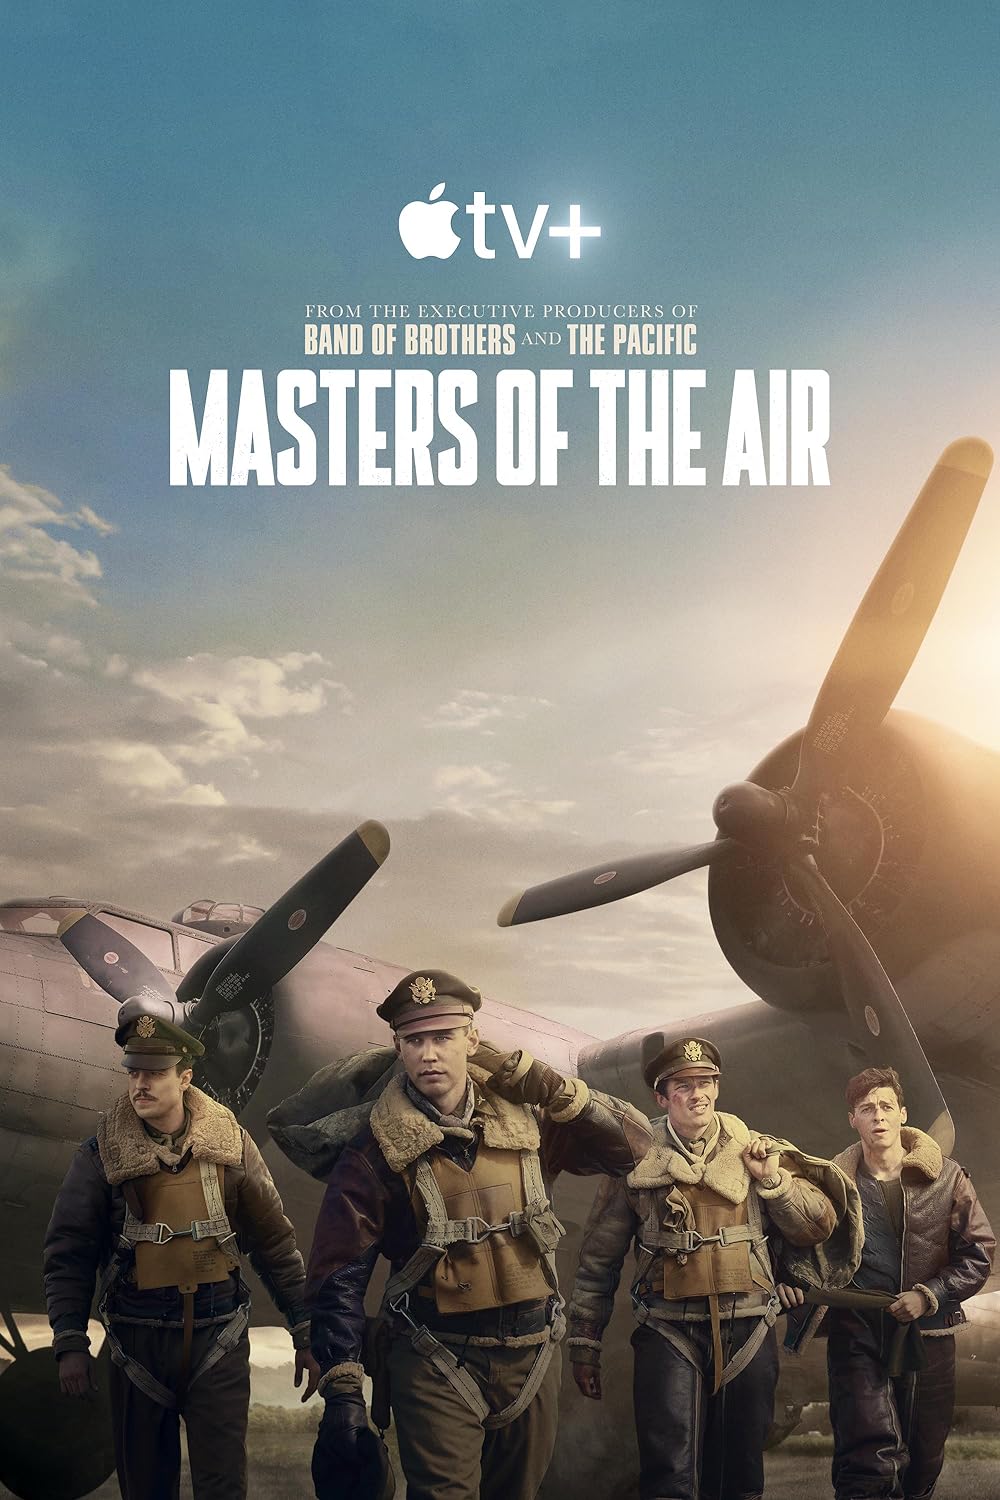 Masters of the Air (January 26) - Streaming on Apple TV+Masters of the Air is an American war drama miniseries, an adaptation of Donald L. Miller’s book. It chronicles the experiences of the 100th Bomb Group of the Eighth Air Force, known as the “Bloody Hundredth,” during World War II. The show serves as a companion to the renowned series 